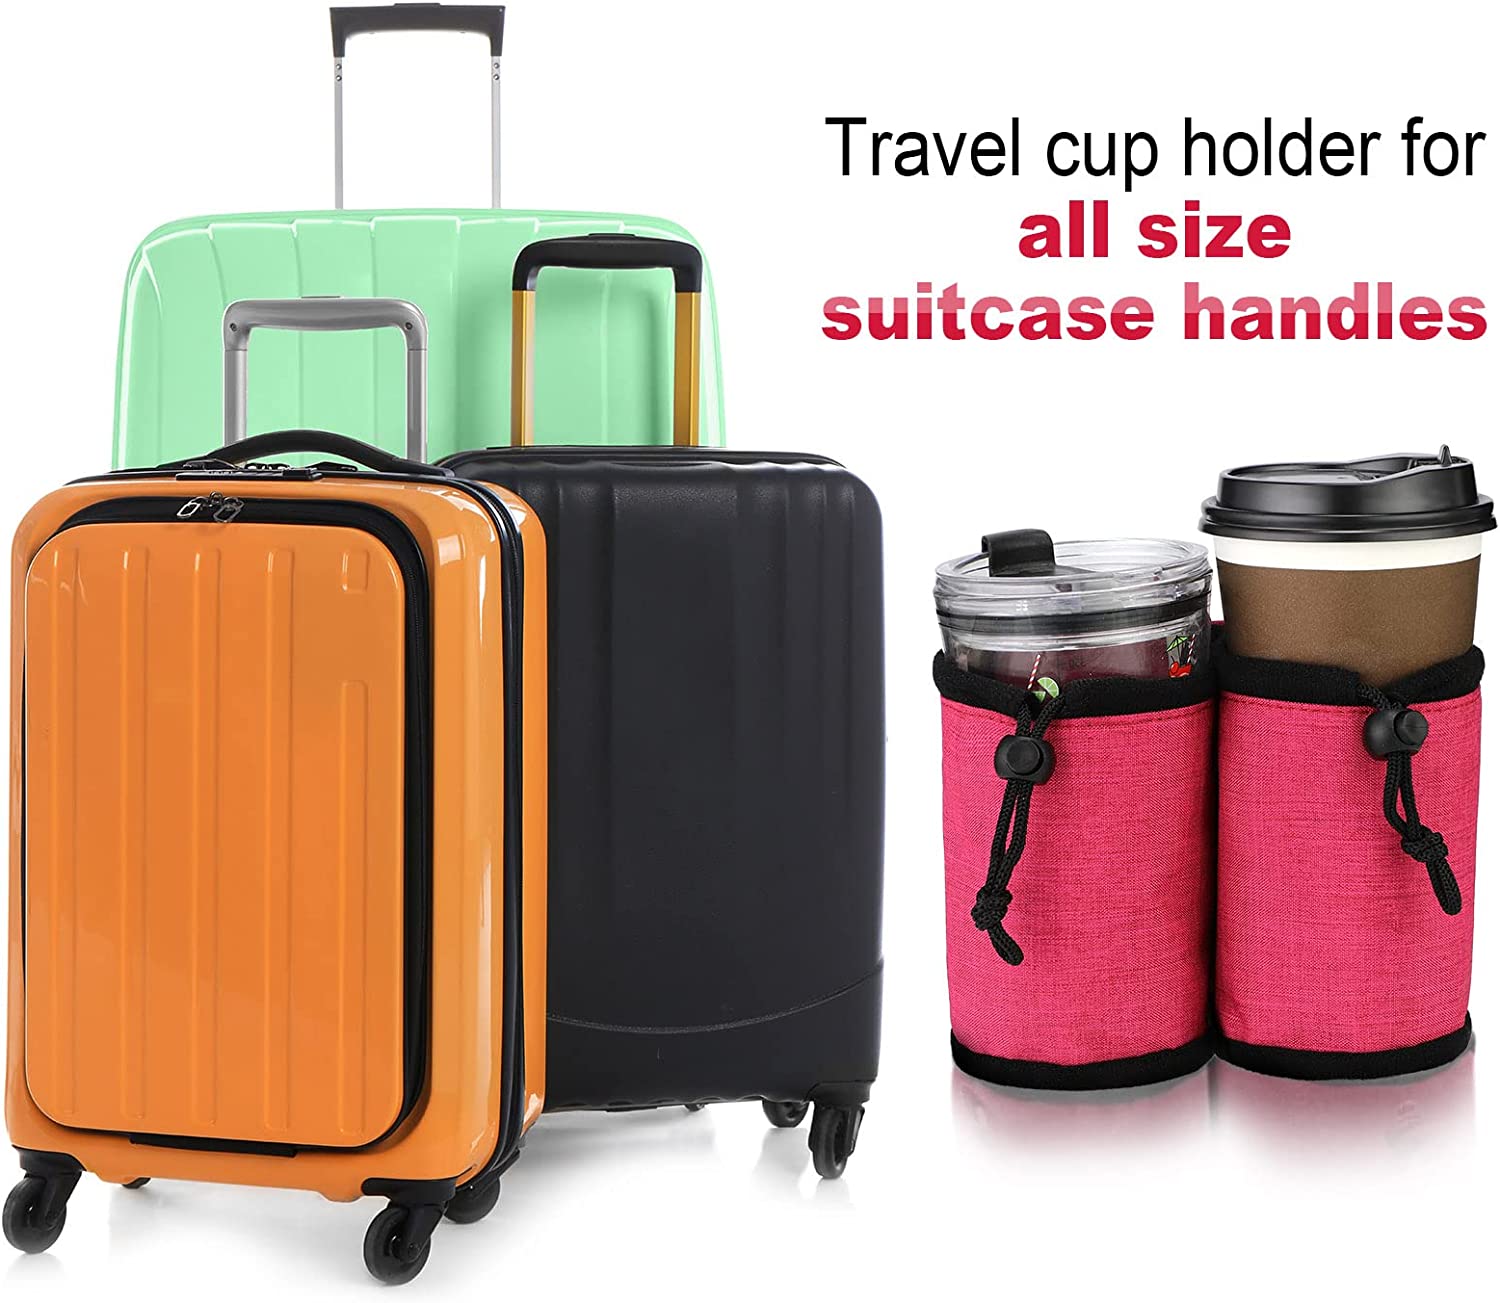 Luggage Cup Holder Travel Cup Holder Luggage Cup Holder Attachment